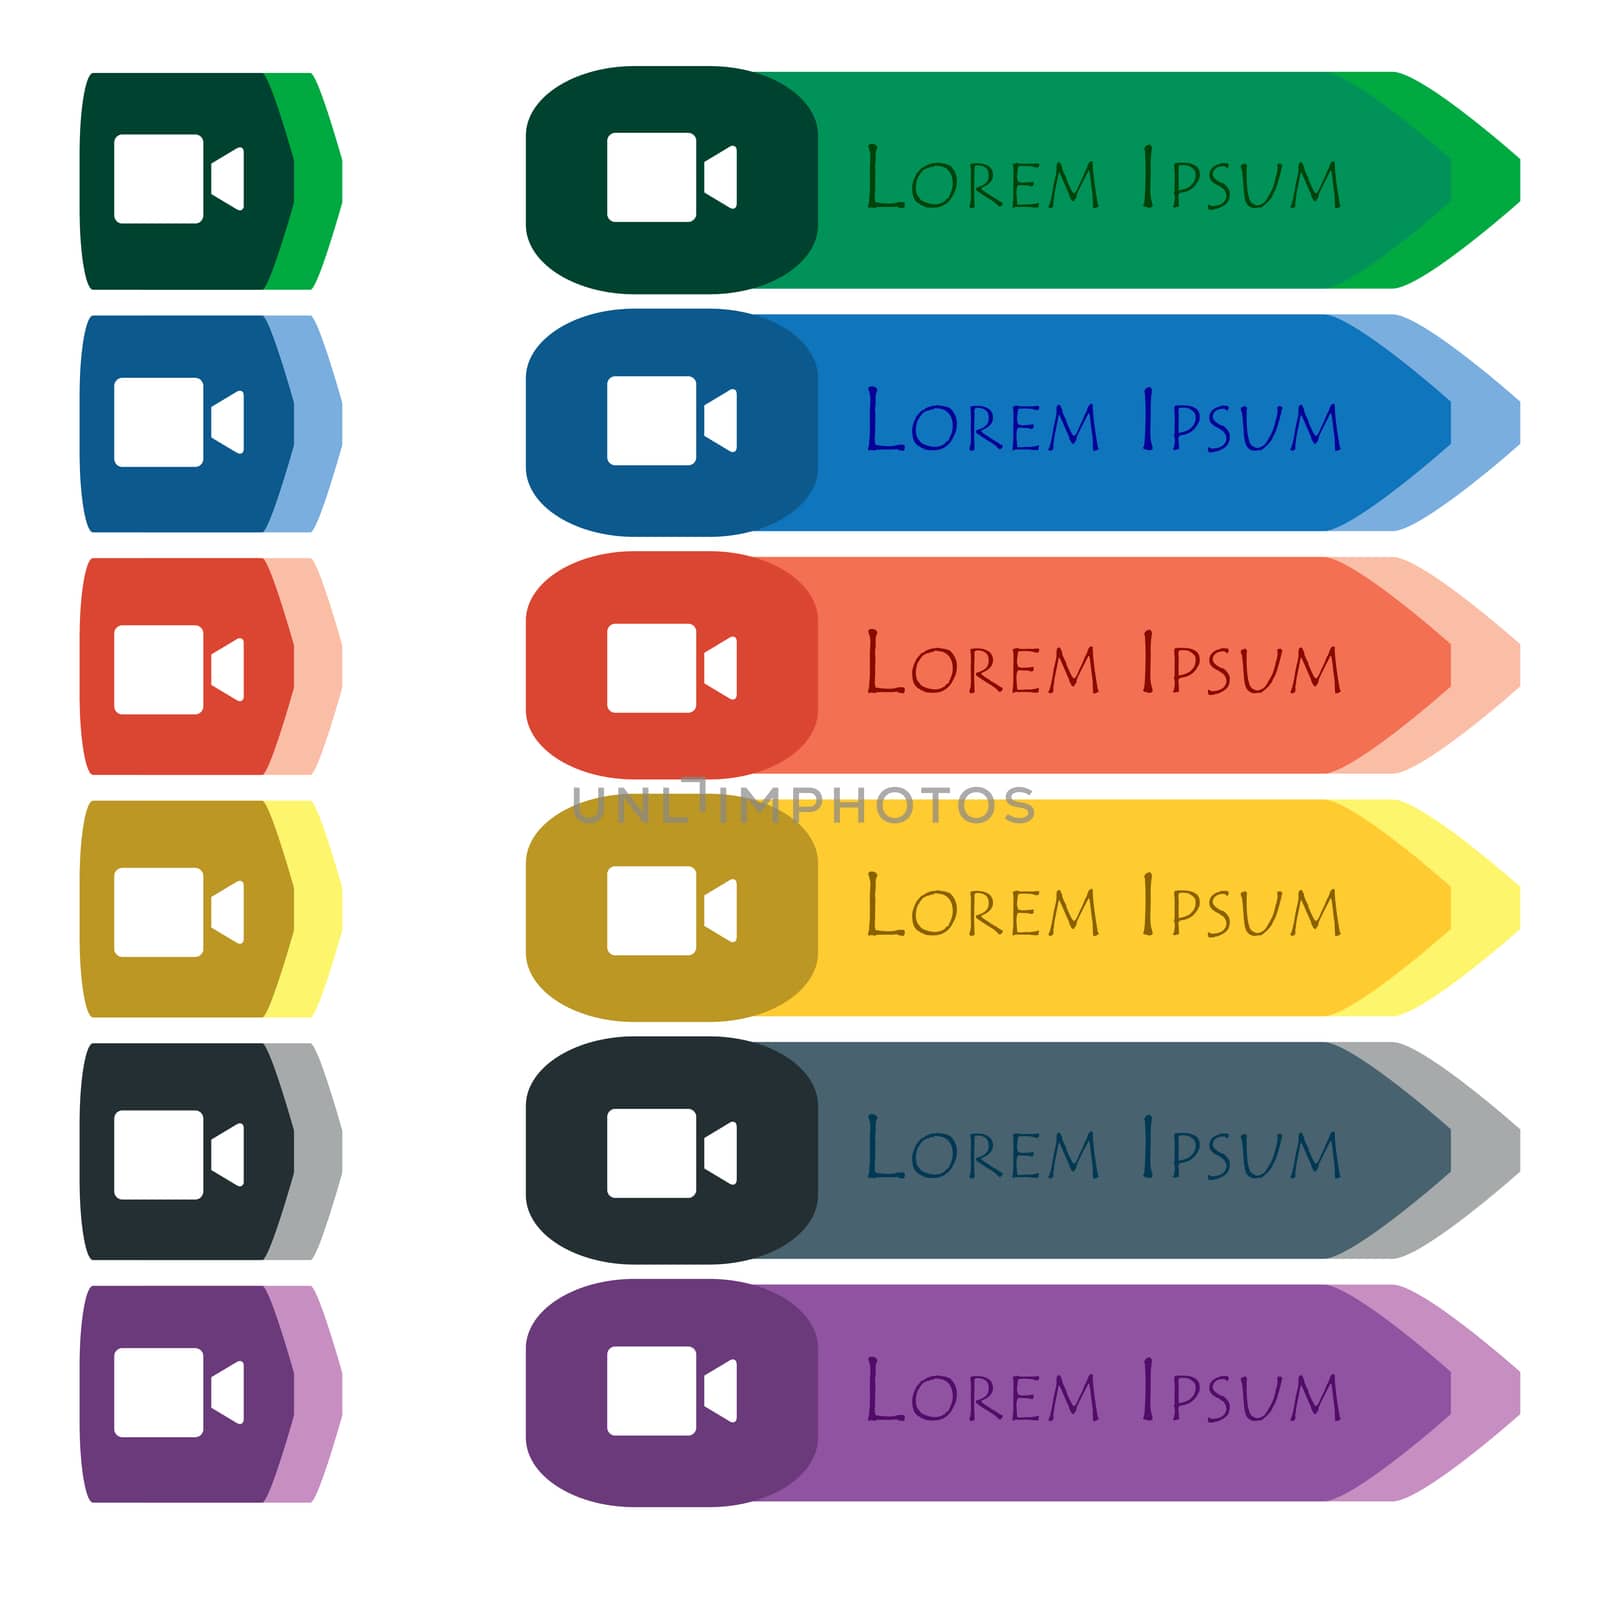 Video camera icon sign. Set of colorful, bright long buttons with additional small modules. Flat design. 